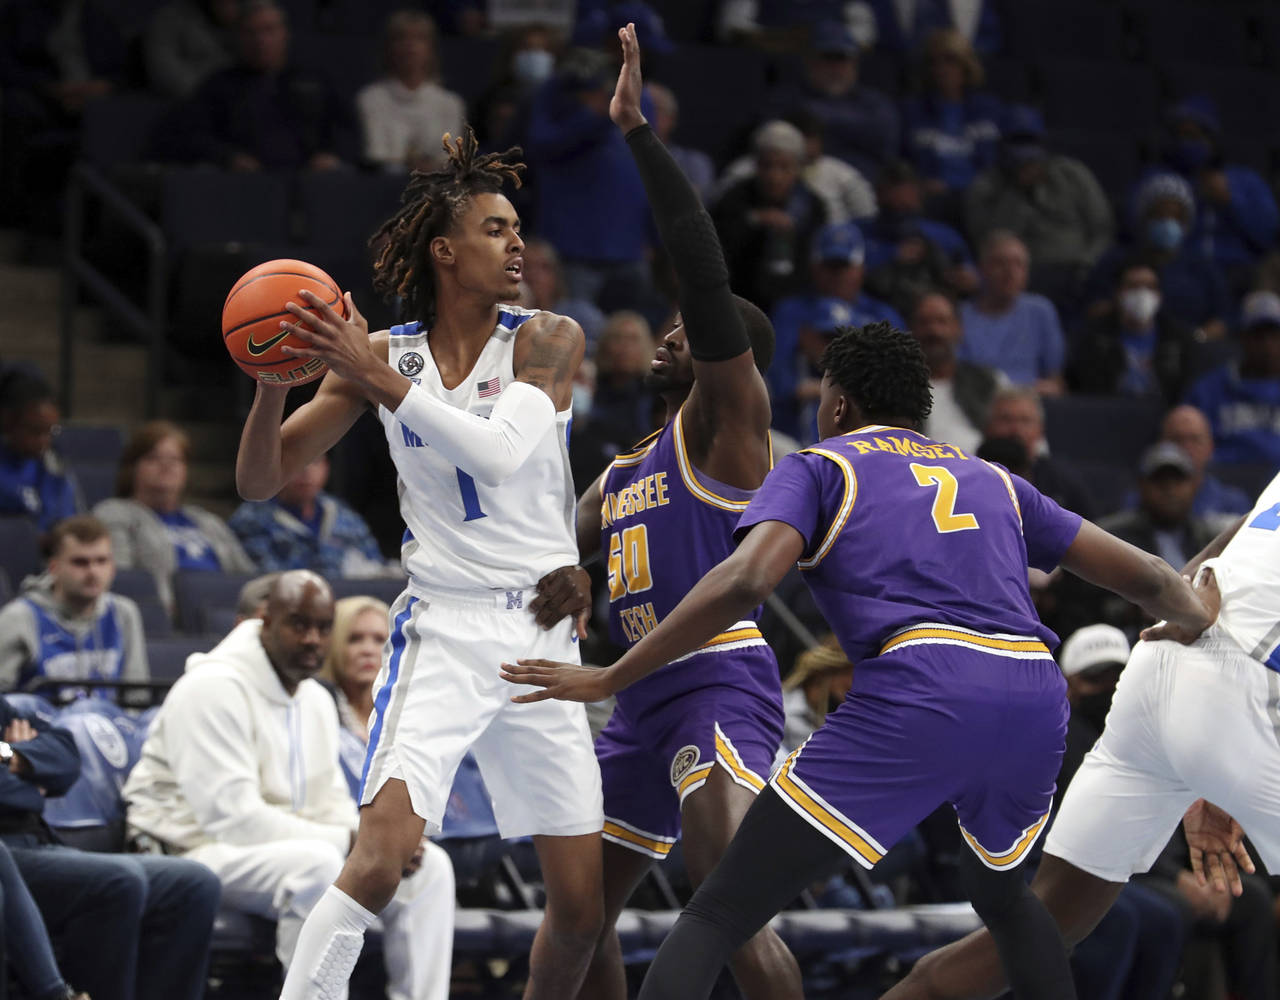 Tennessee Tech's John Pettway center, defends as Memphis Emoni Bates looks for an outlet in the fir...